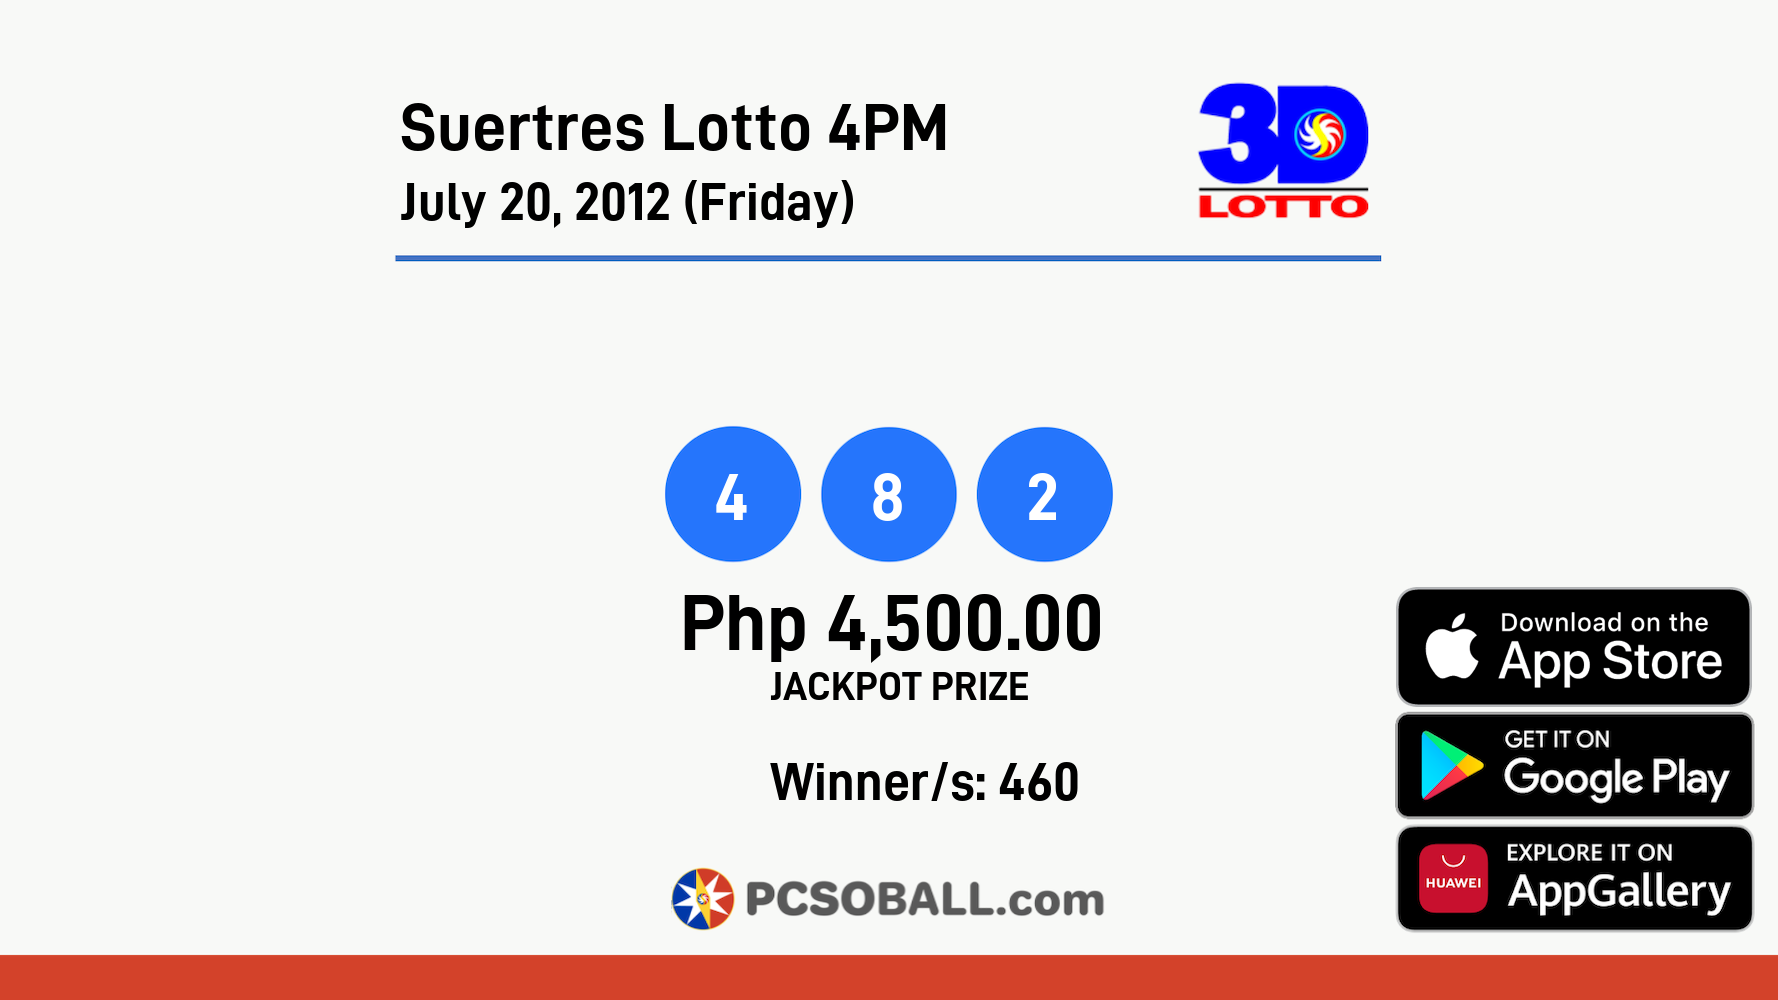 Suertres Lotto 4PM July 20, 2012 (Friday) Result